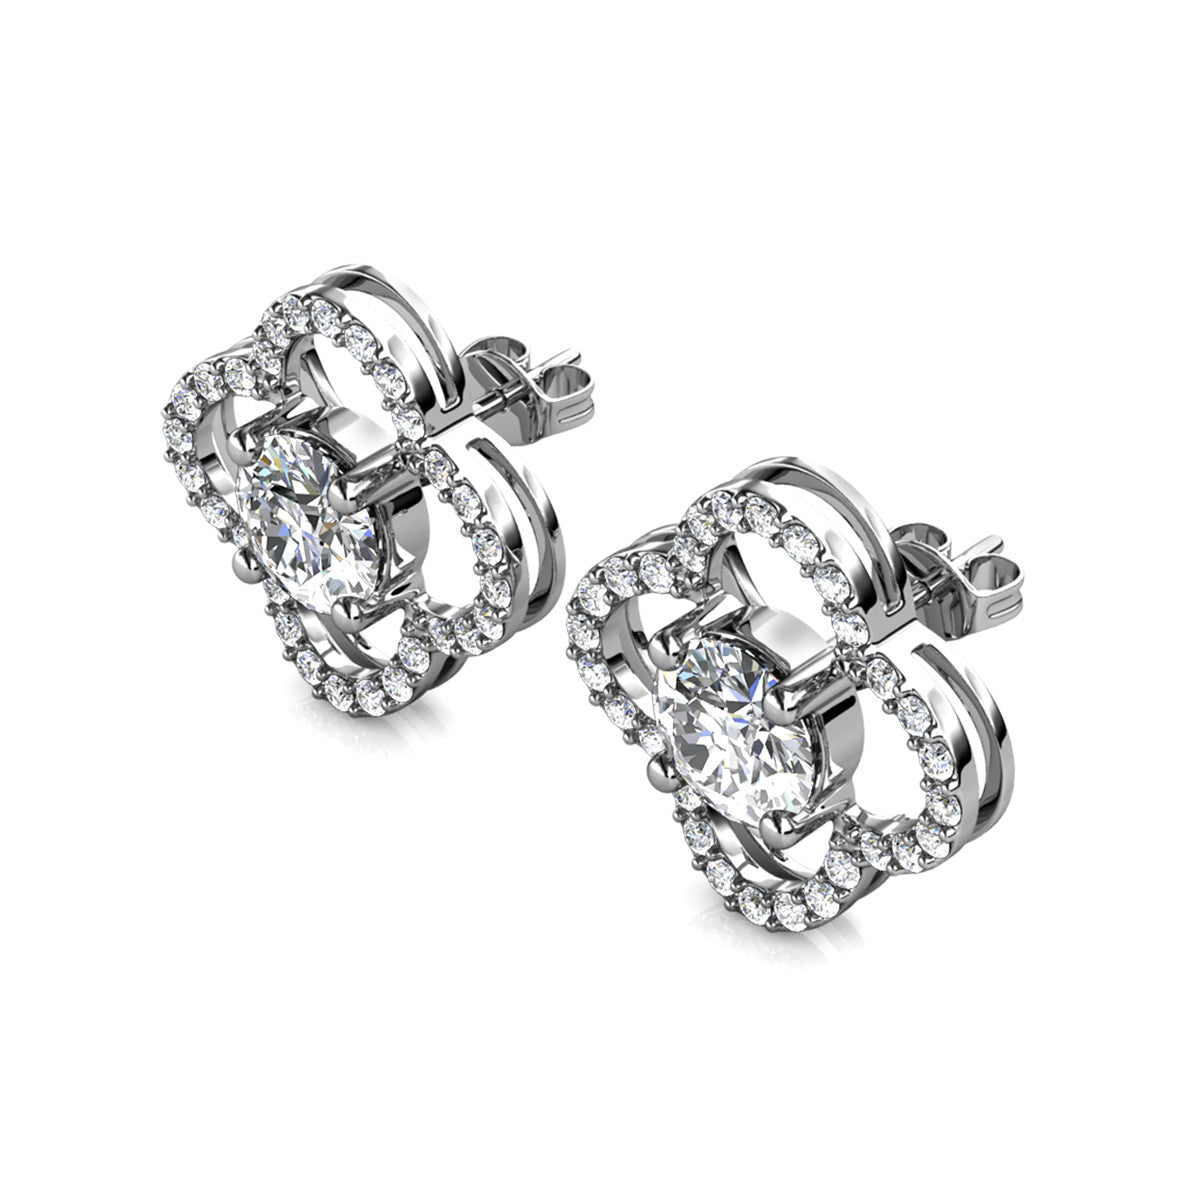 Moissanite by Cate & Chloe Charlotte Sterling Silver Stud Earrings with Moissanite and 5A Cubic Zirconia Crystals